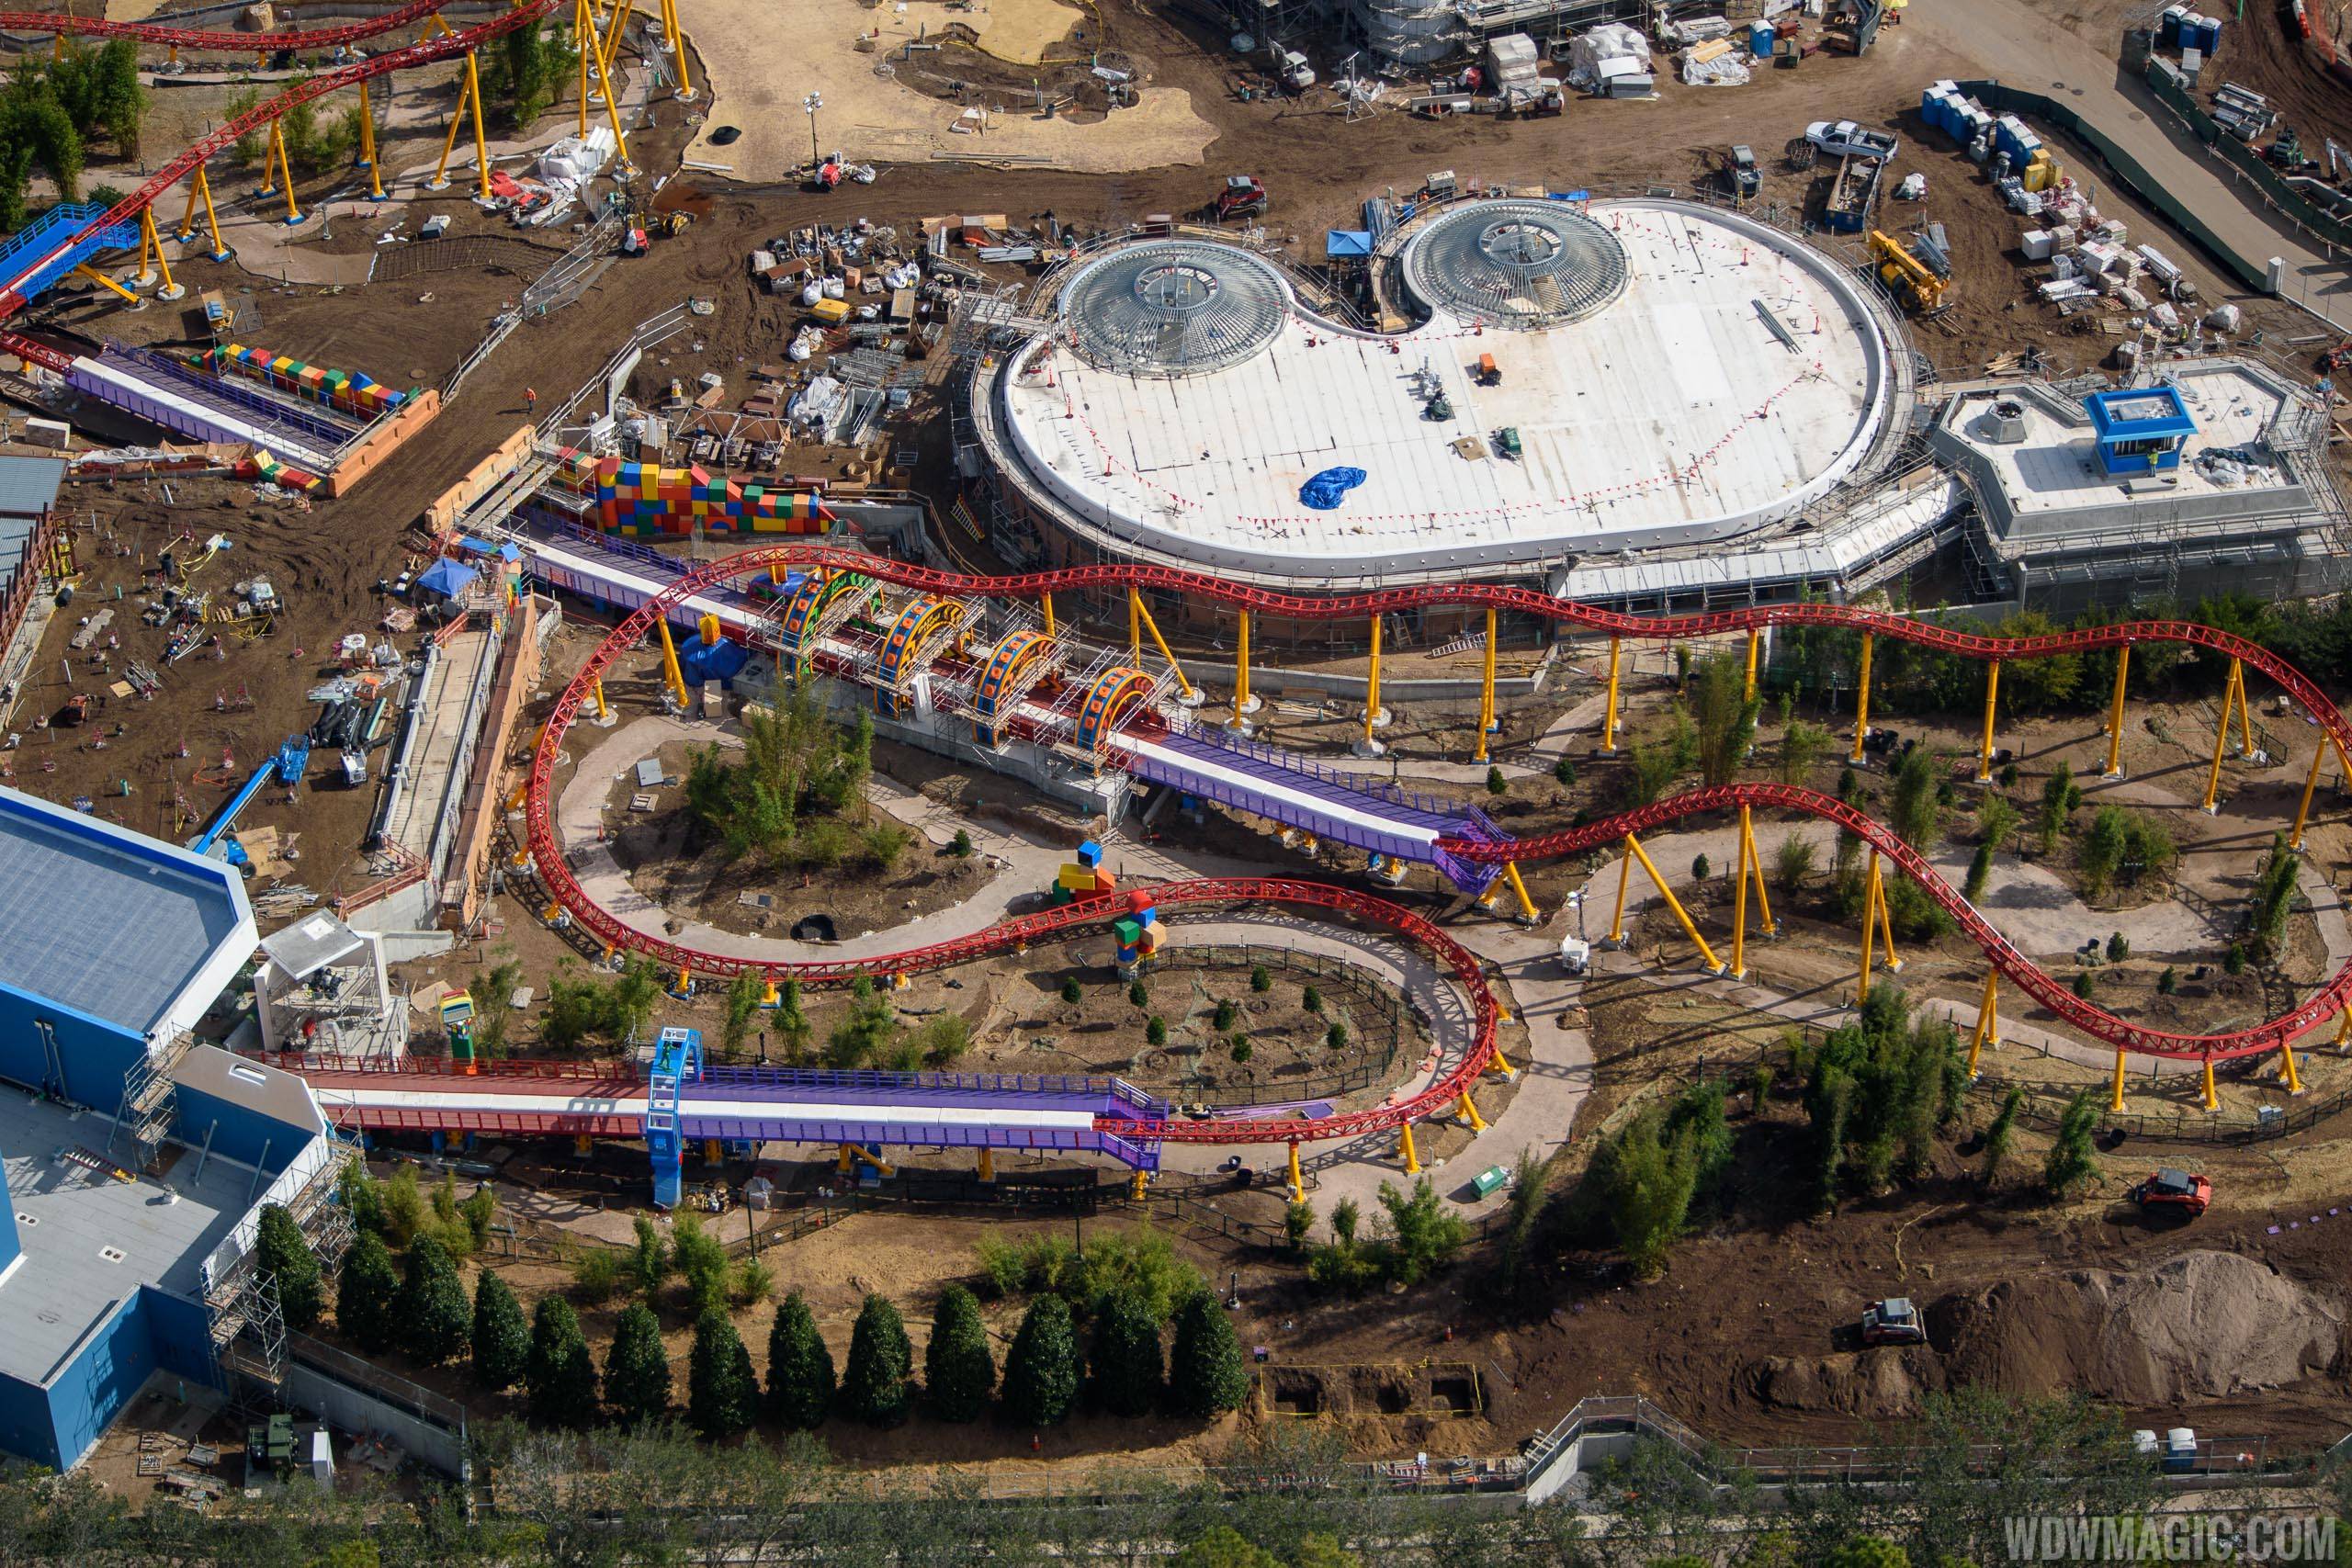 Slinky Dog Dash Coaster and Alien Swirling Saucers